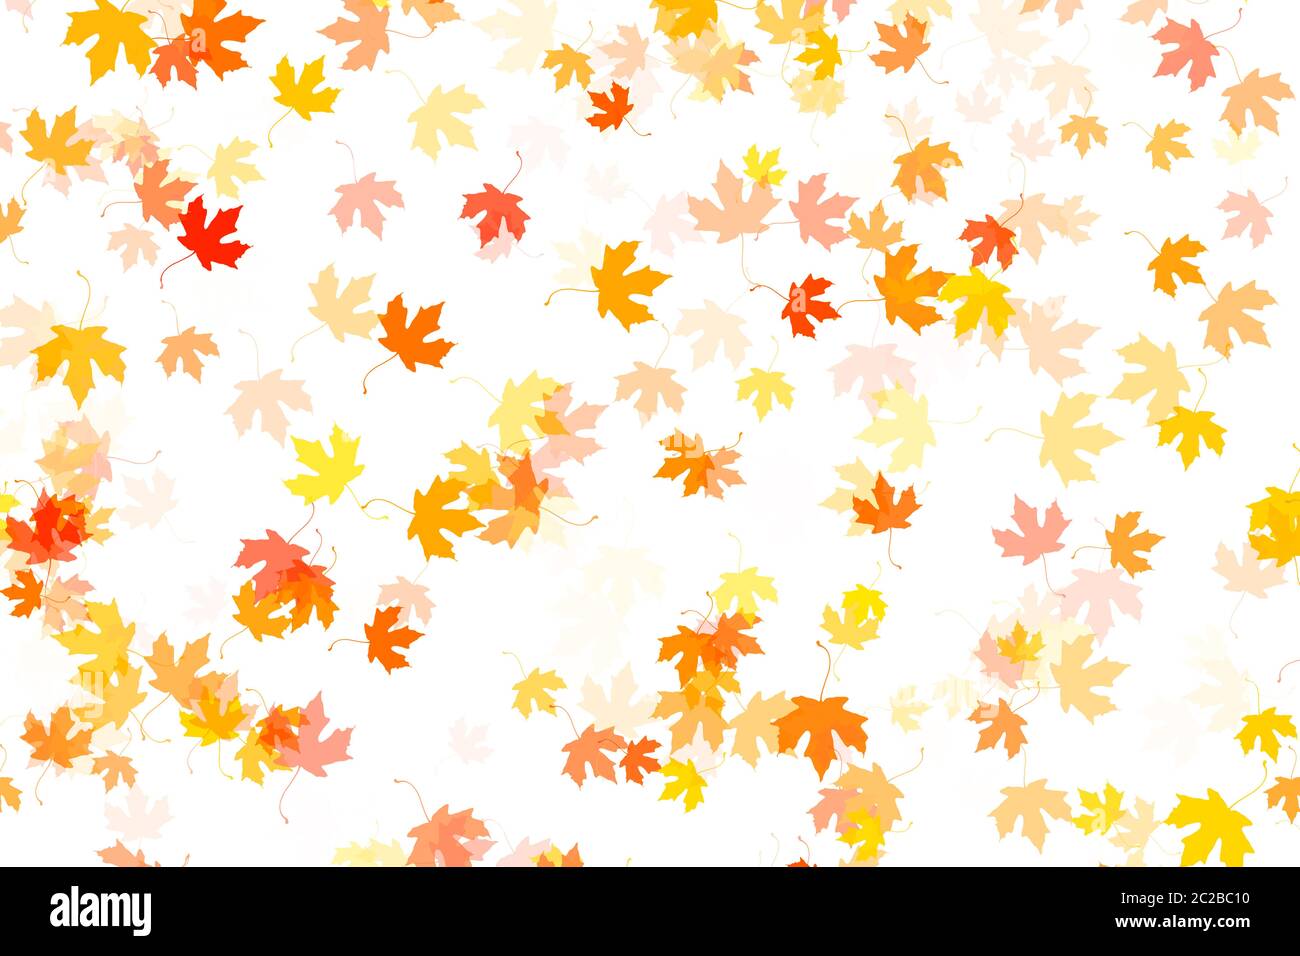 Multi colored autumn leaves background Stock Photo